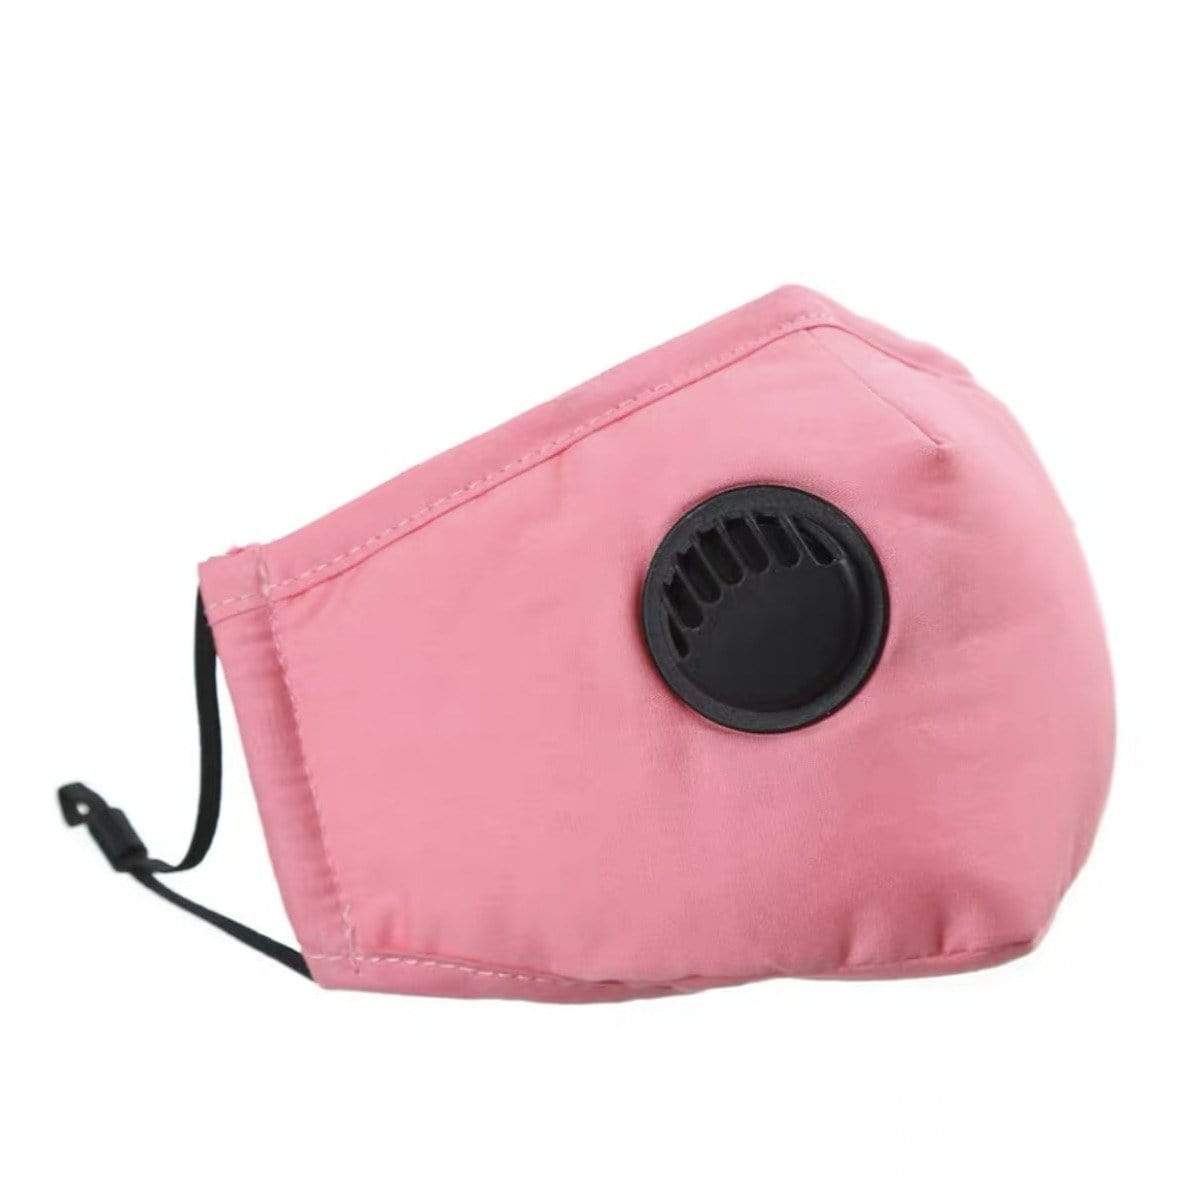 Helms Store Masks Light Pink Plain Reusable & Adjustable Adults Face Mask with filter pocket and valve (3 Colours)